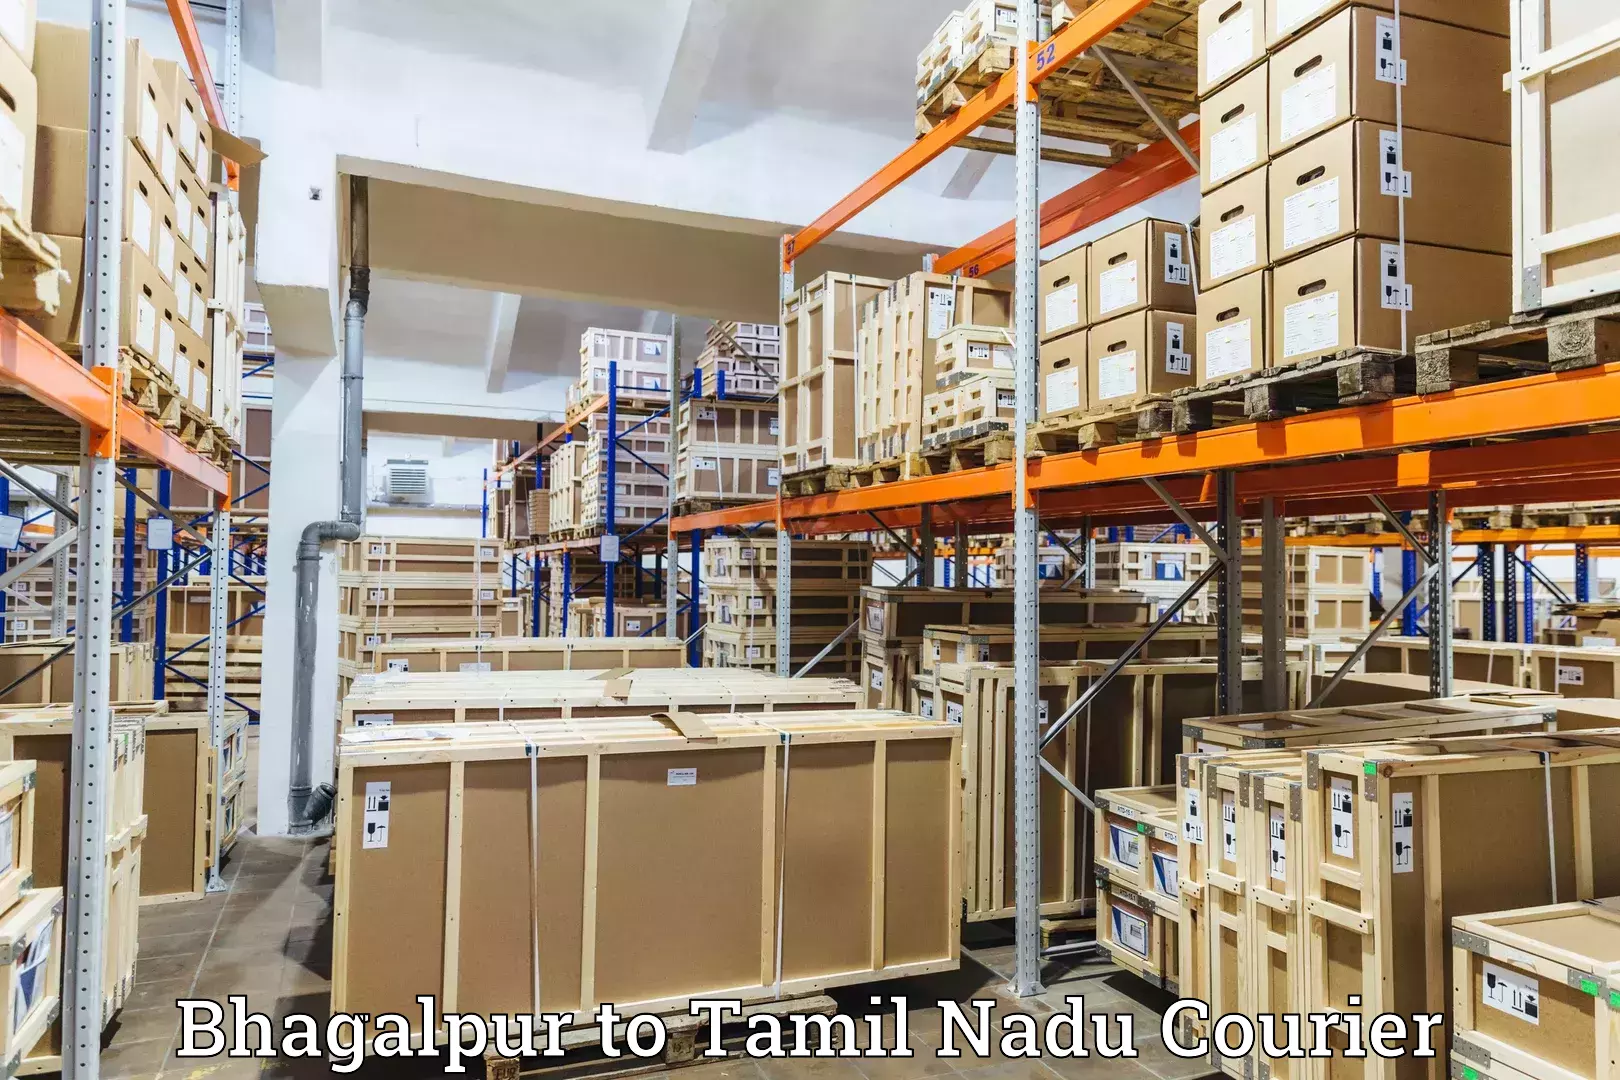 Next-day delivery options Bhagalpur to Chennai Port